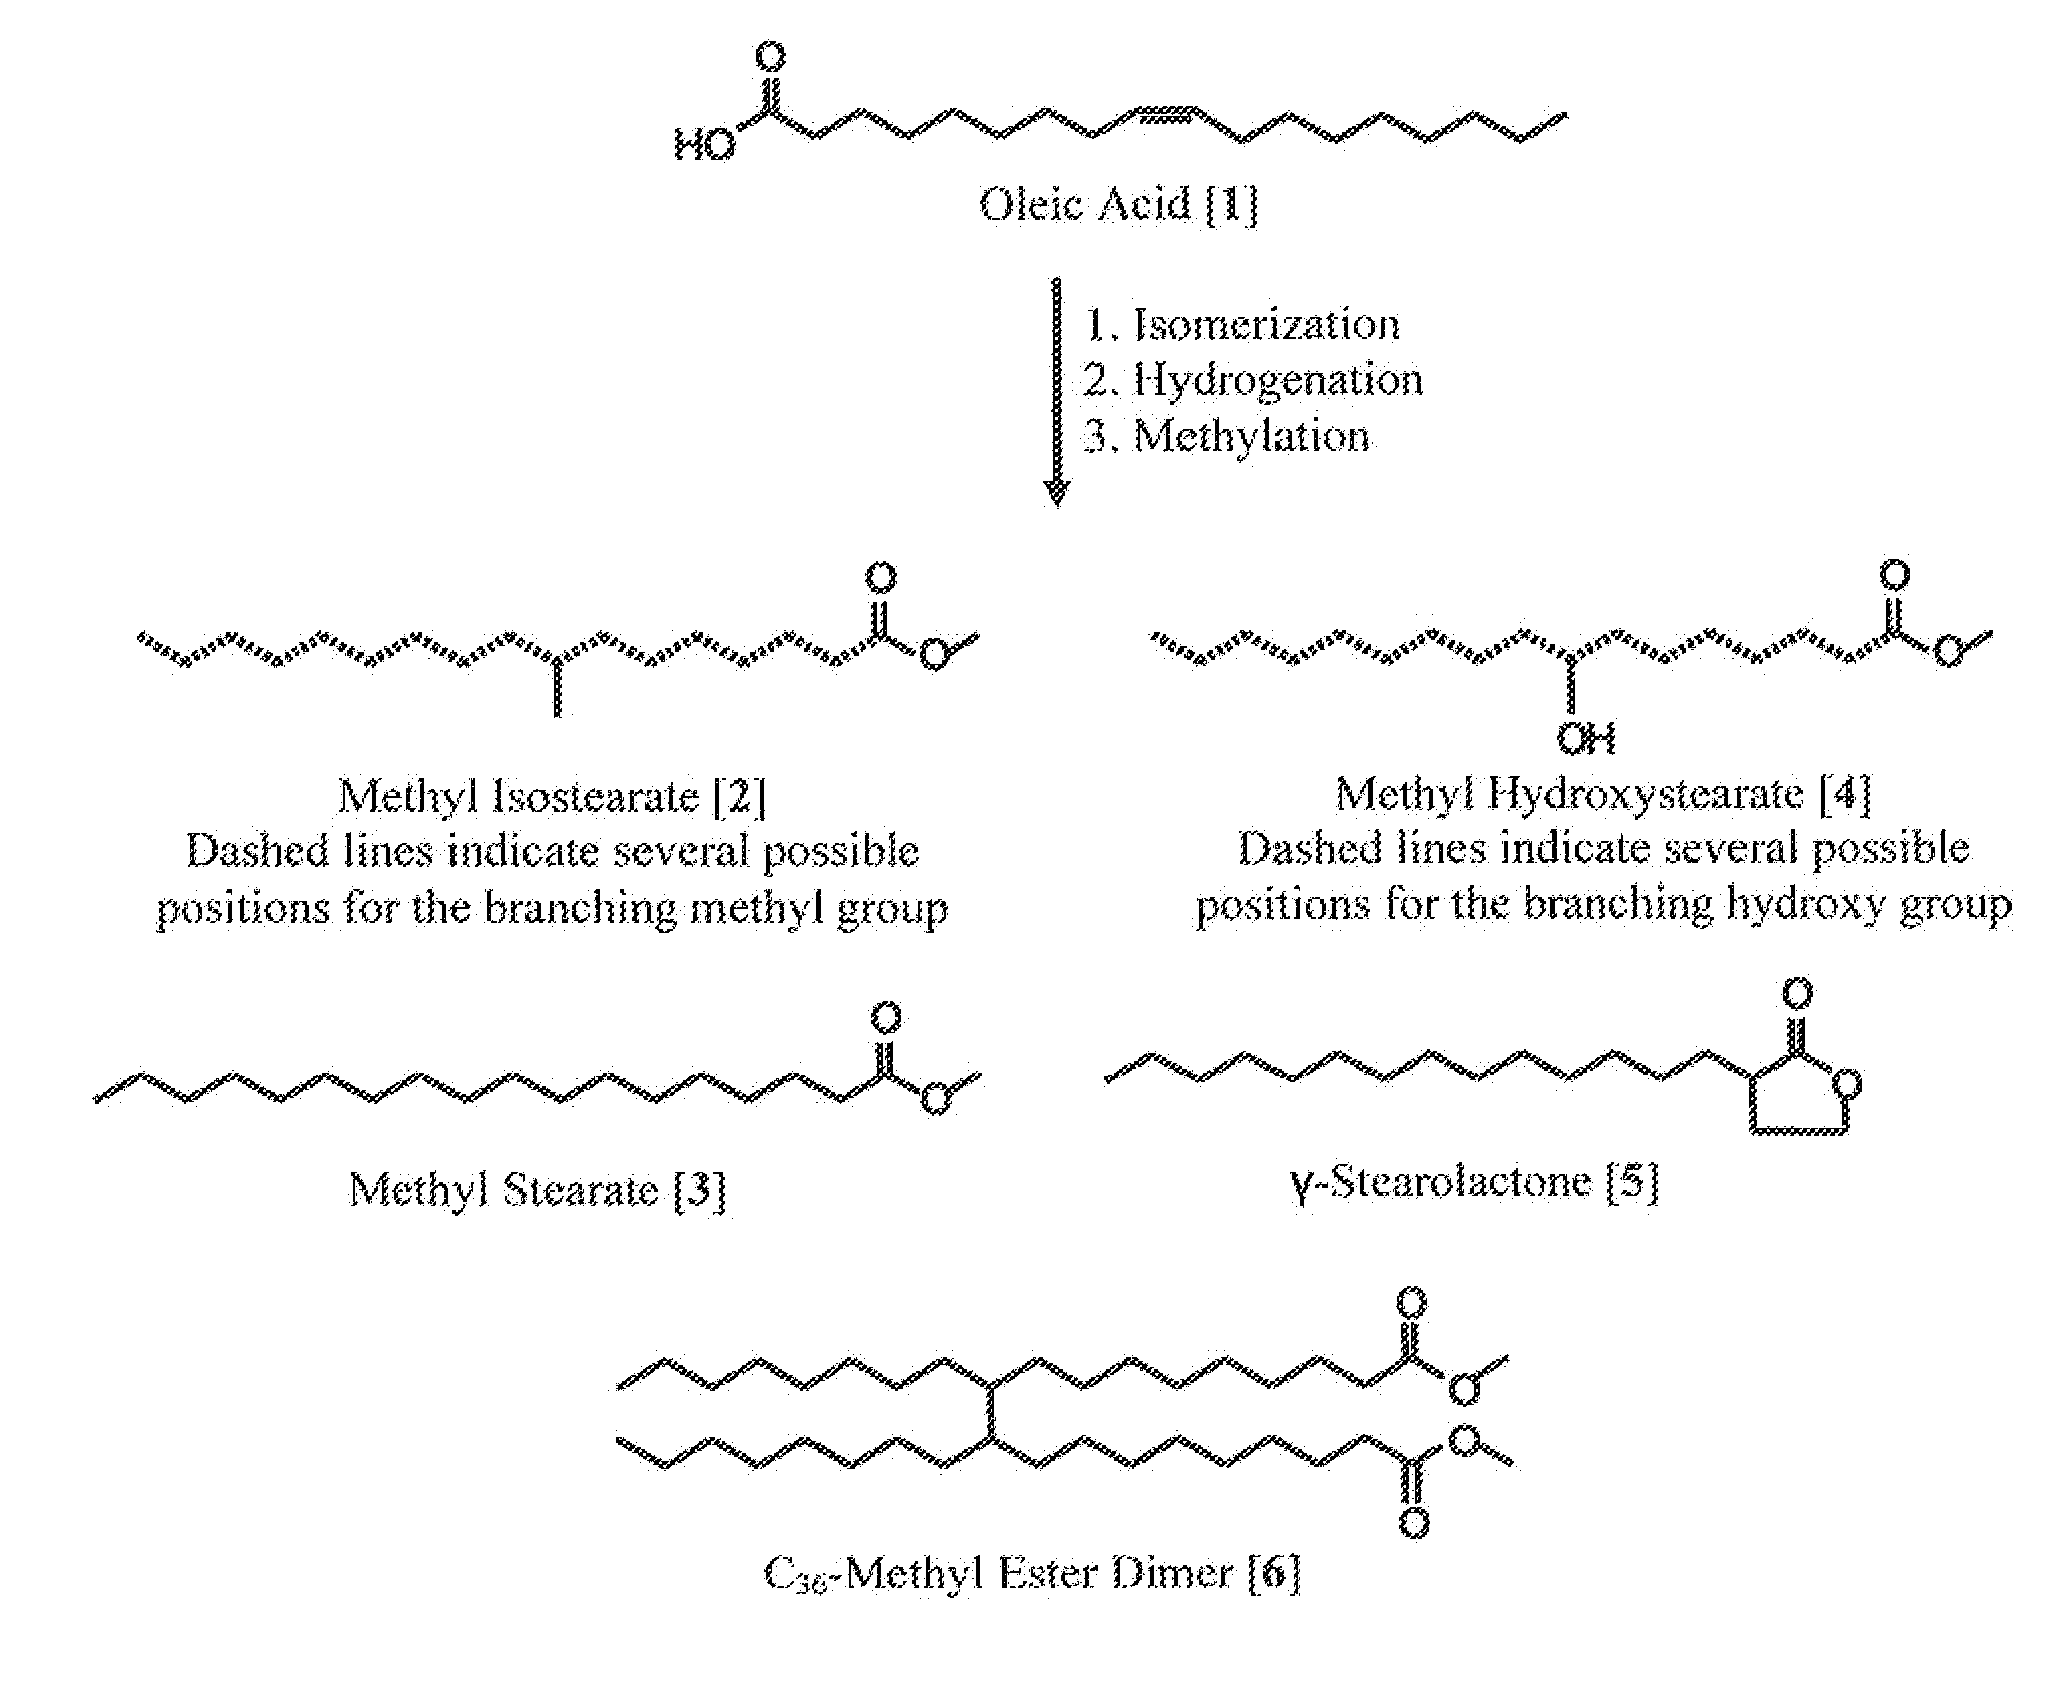 Process for Preparing Saturated Branched Chain Fatty Acids